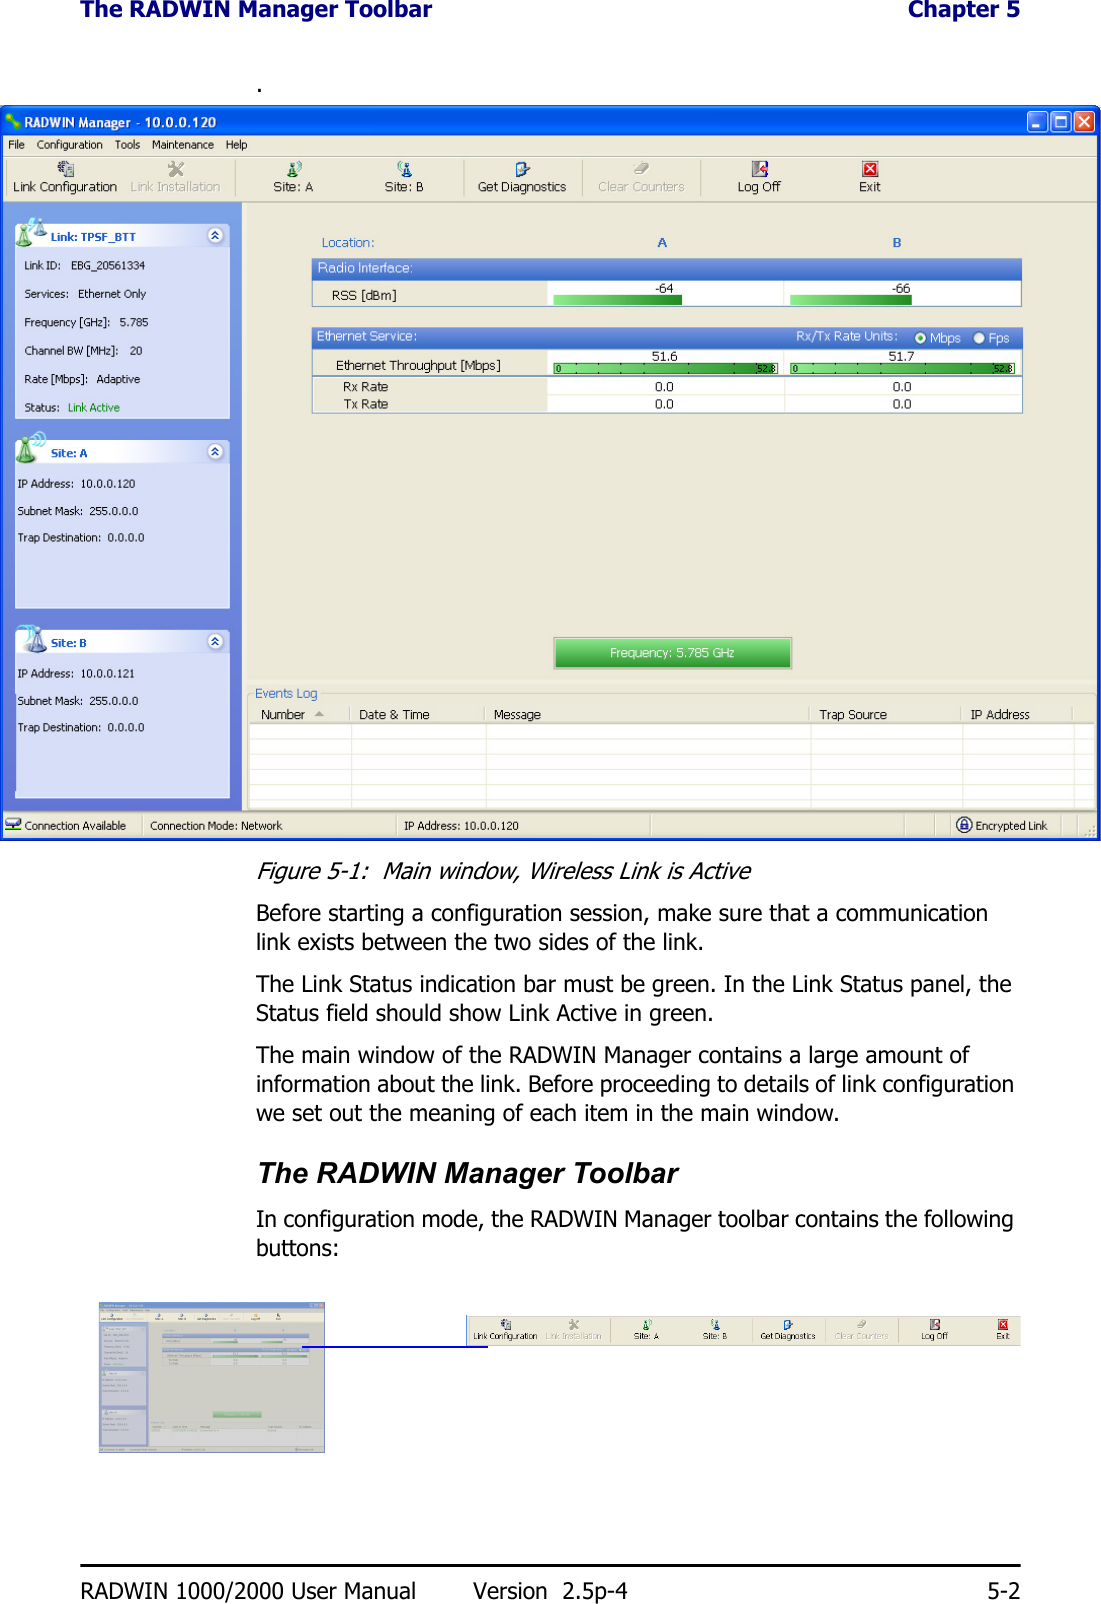 The RADWIN Manager Toolbar  Chapter 5RADWIN 1000/2000 User Manual Version  2.5p-4 5-2.Figure 5-1:  Main window, Wireless Link is ActiveBefore starting a configuration session, make sure that a communication link exists between the two sides of the link.The Link Status indication bar must be green. In the Link Status panel, the Status field should show Link Active in green.The main window of the RADWIN Manager contains a large amount of information about the link. Before proceeding to details of link configuration we set out the meaning of each item in the main window.The RADWIN Manager ToolbarIn configuration mode, the RADWIN Manager toolbar contains the following buttons: